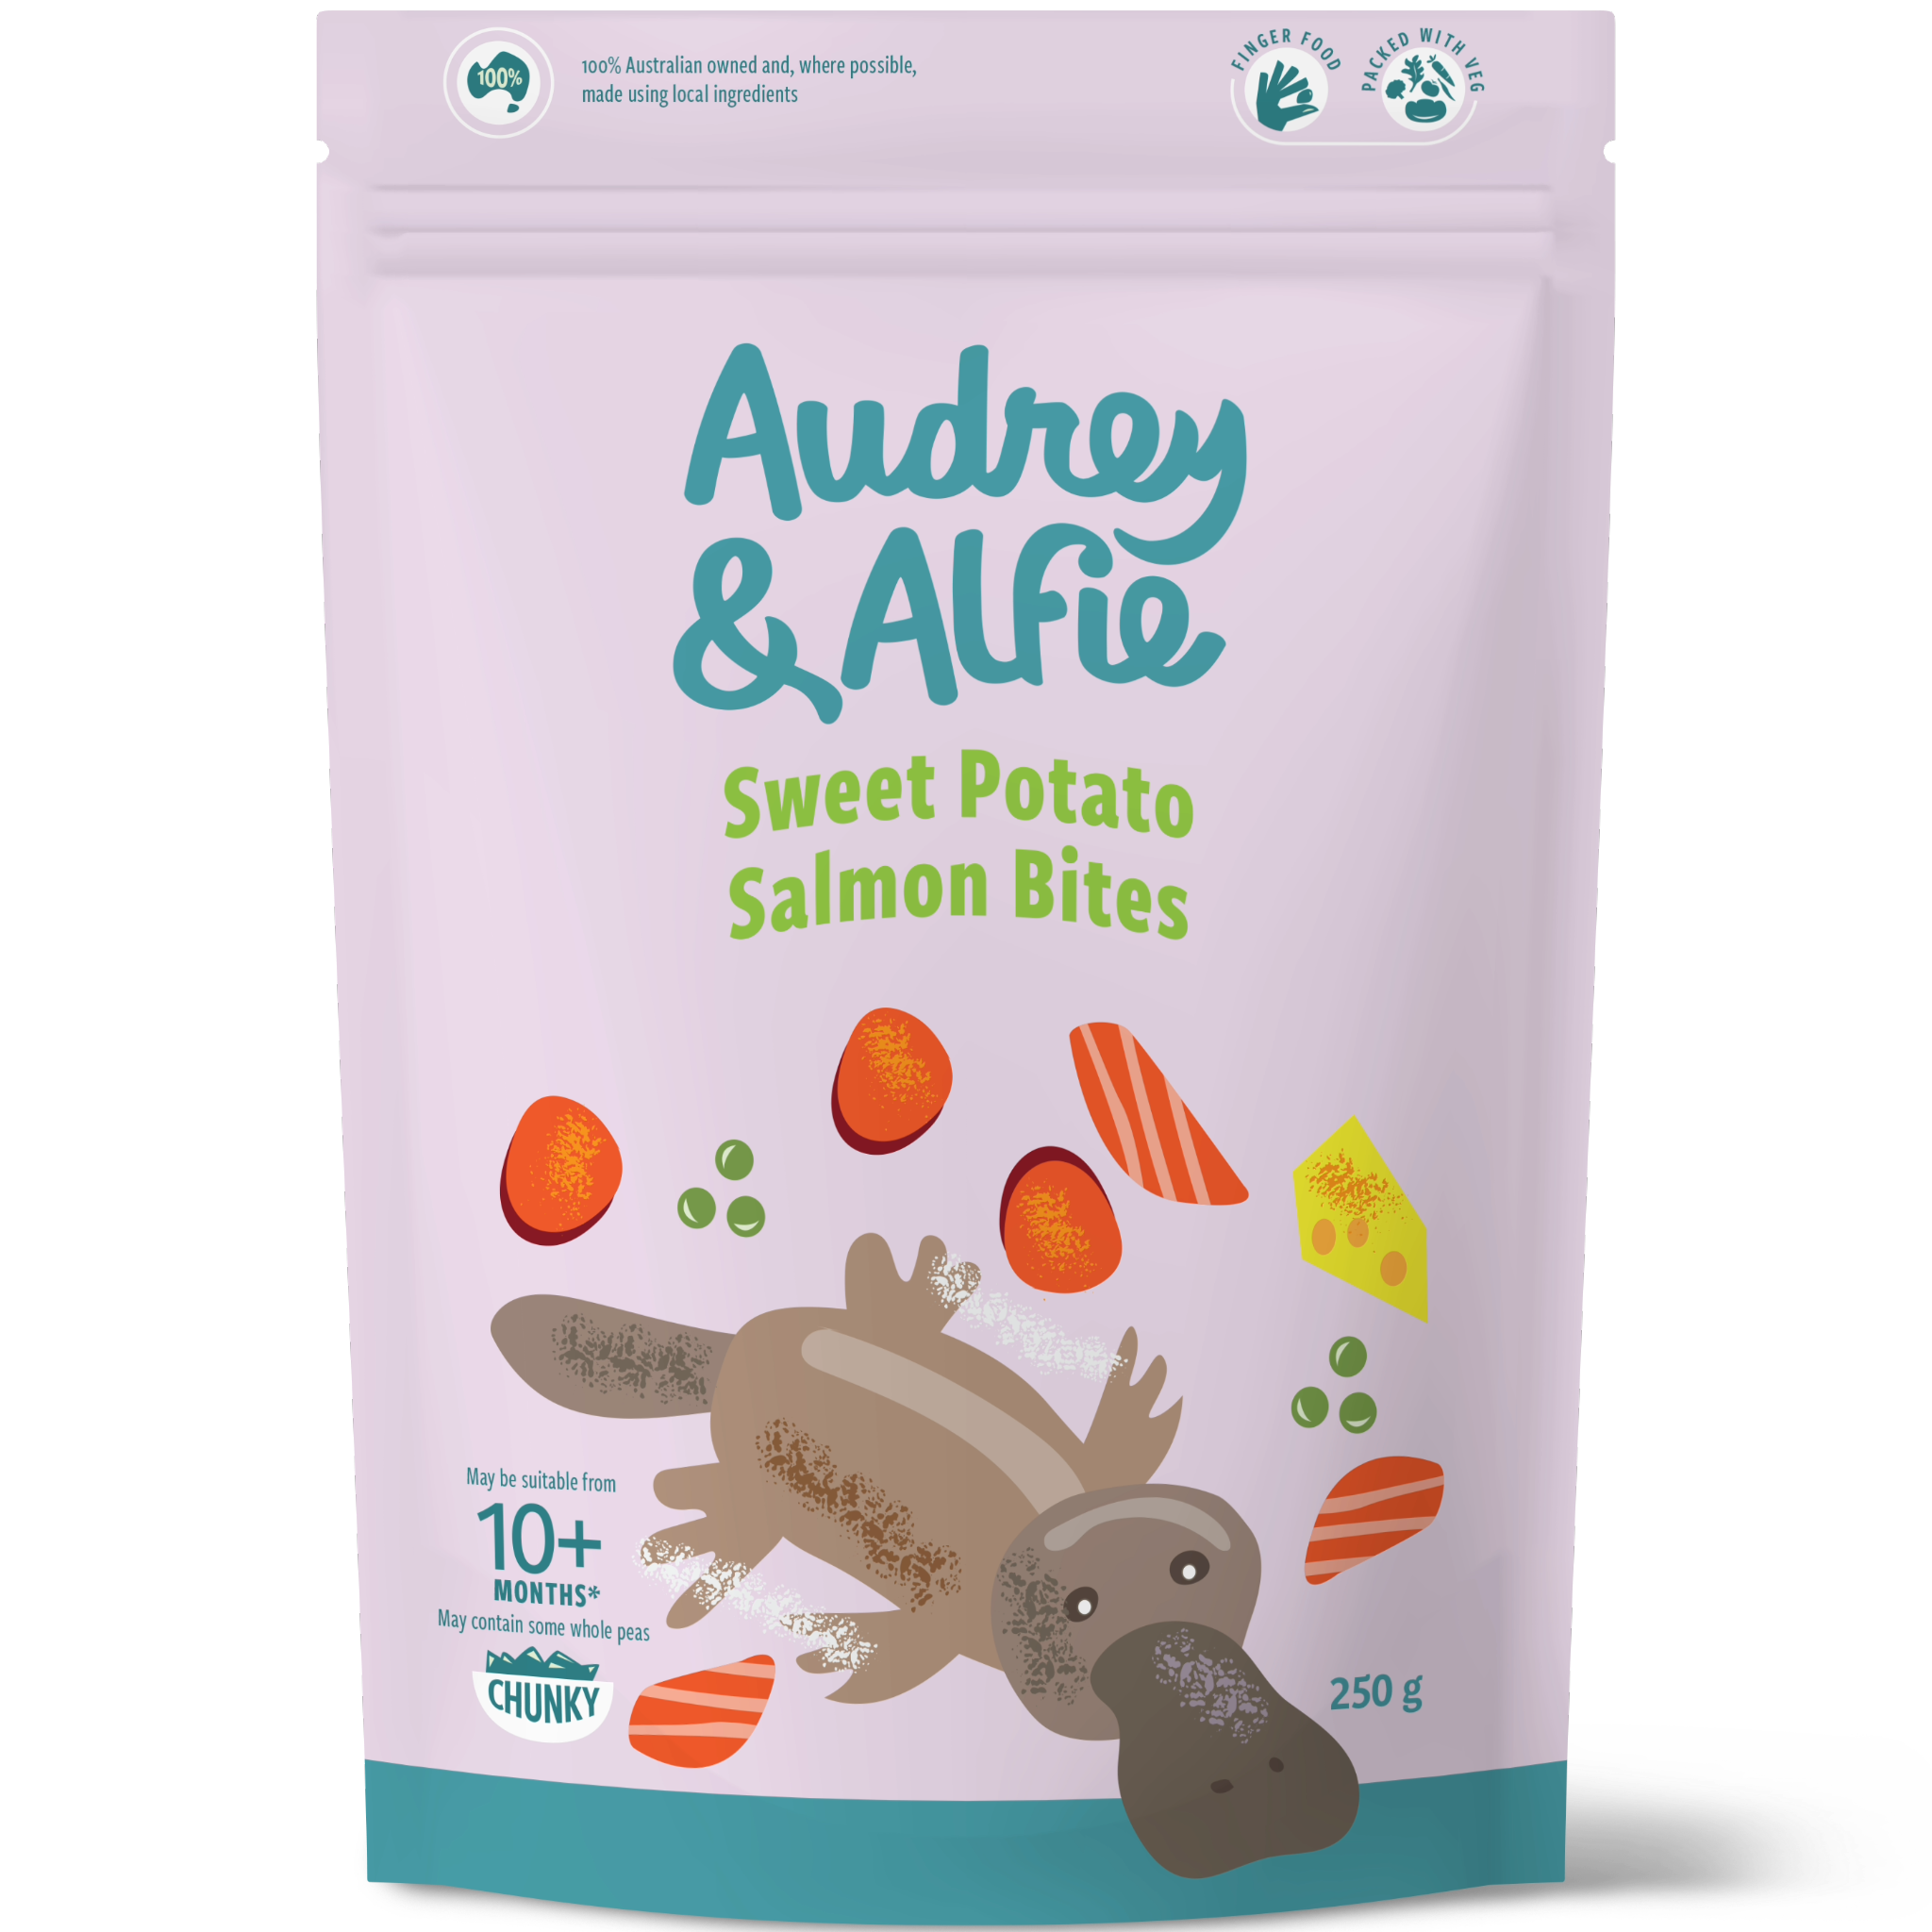 A Packet of Sweet Potato Salmon Bites from Audrey & Alfie's Finger Food Range